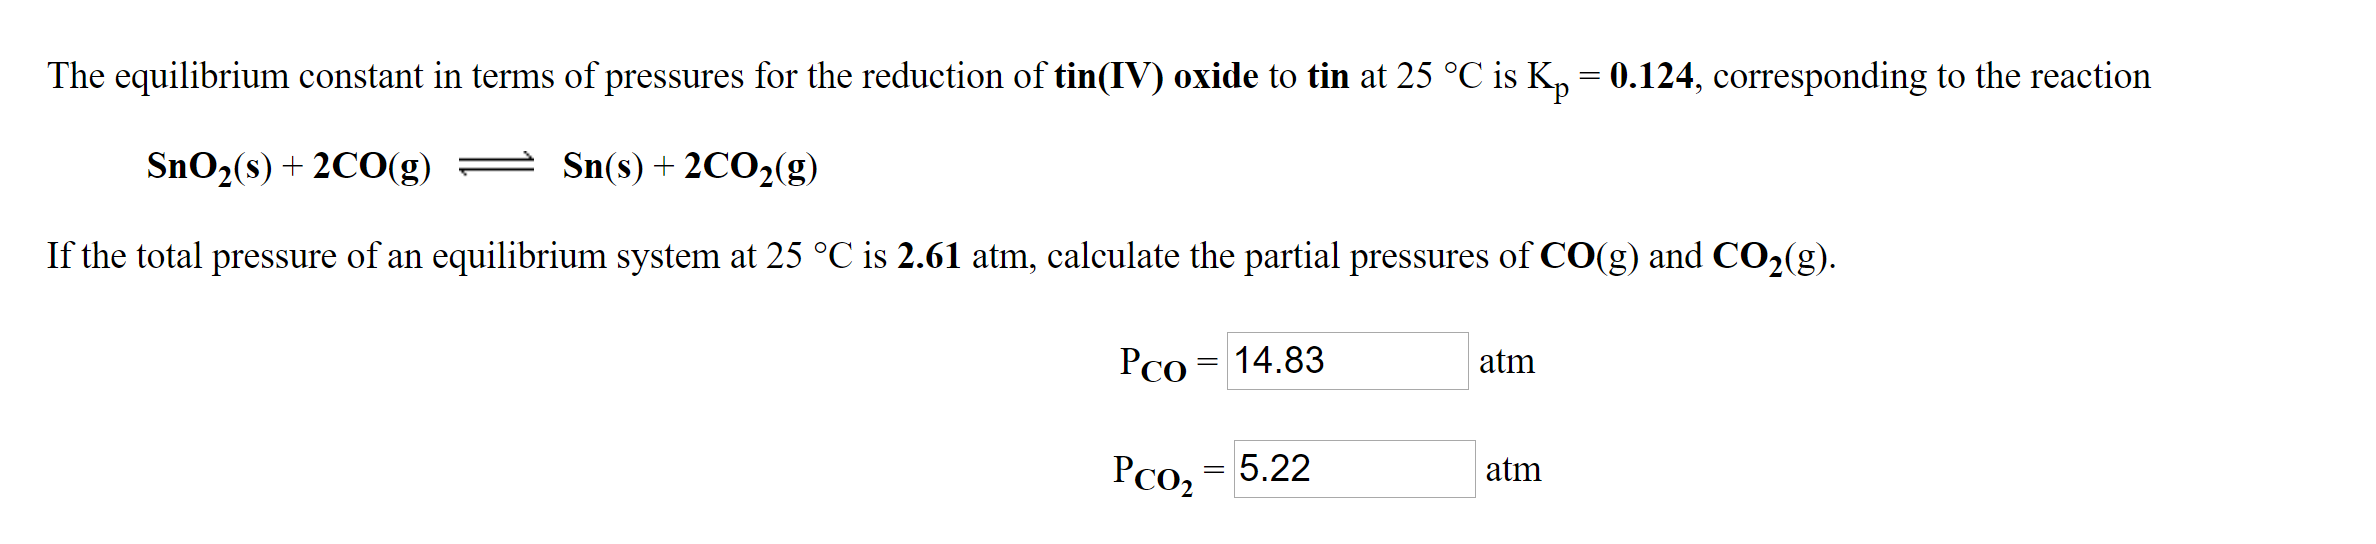 The equilibrium constant in terms of pressures for the reduction of tin(IV) oxide to tin at 25 °C is K, = 0.124, corresponding to the reaction
SnO2(s) + 2CO(g) = )
Sn(s) + 2CO2(g)
If the total pressure of an equilibrium system at 25 °C is 2.61 atm, calculate the partial pressures of CO(g) and CO2(g).
PCo = 14.83
atm
Pco2
5.22
atm
